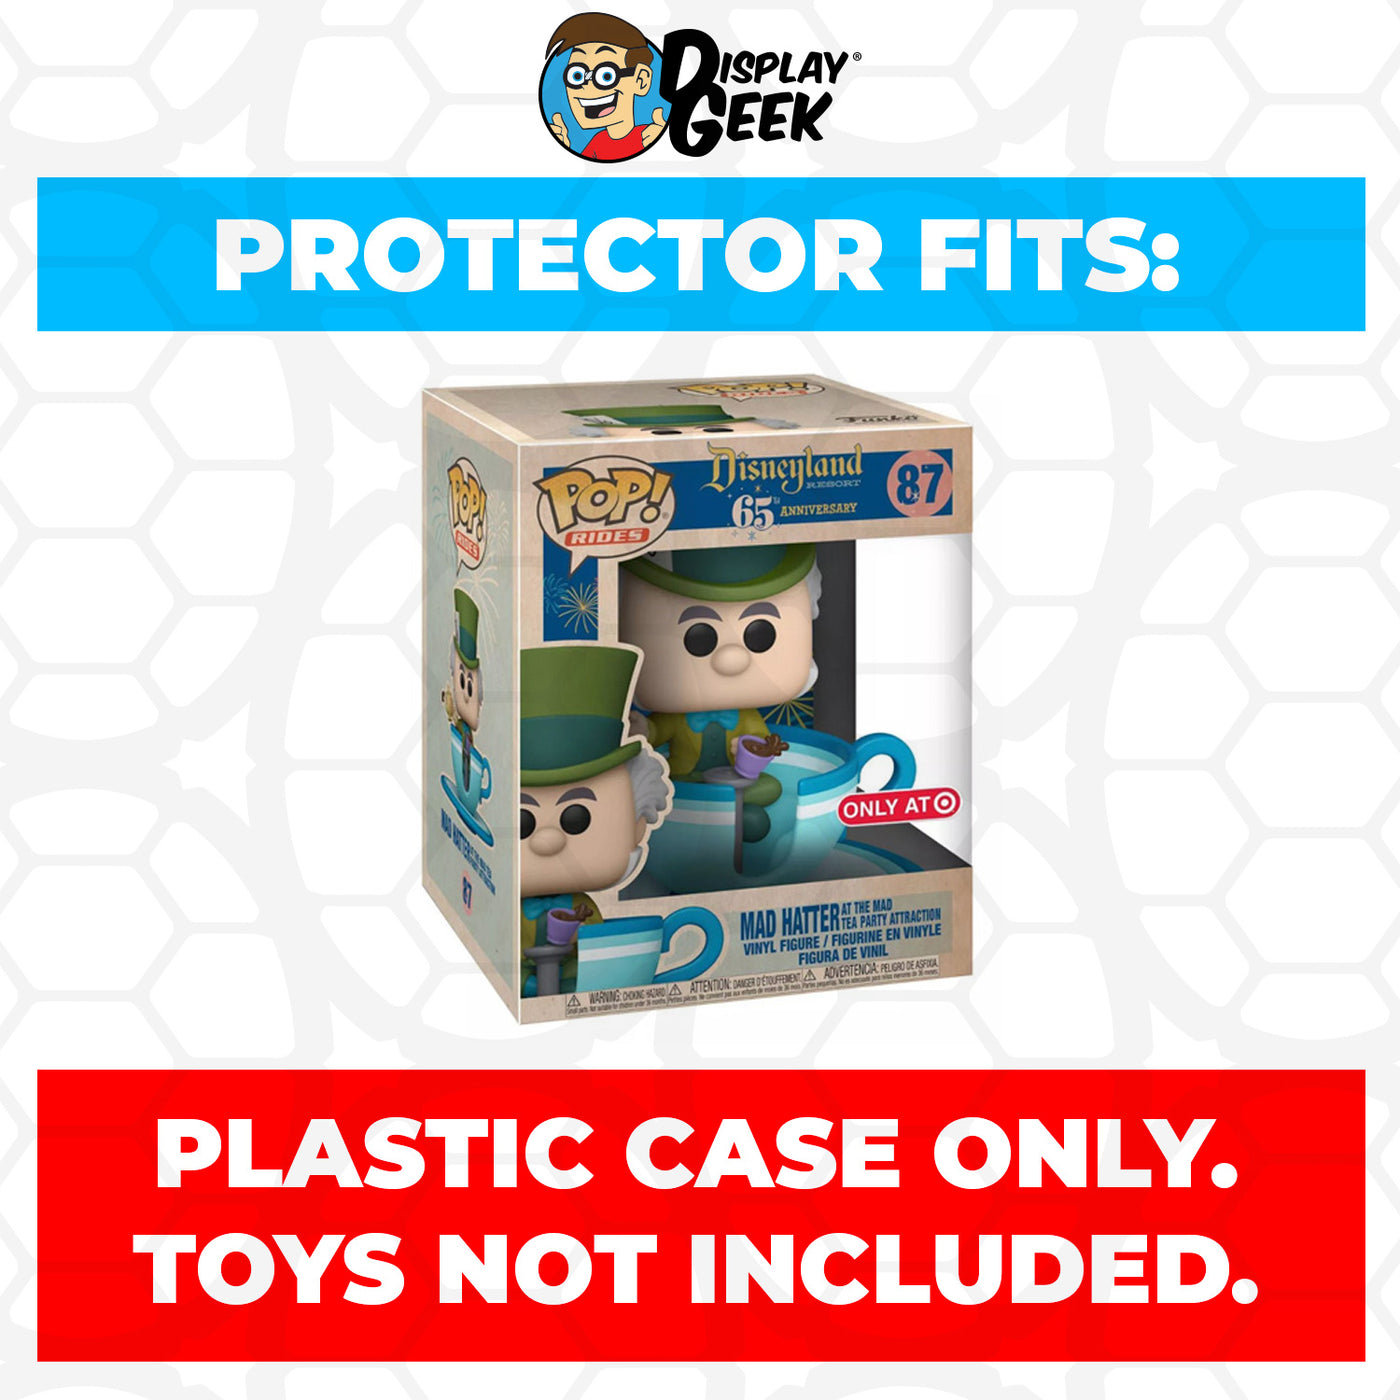 Pop Protector for Mad Hatter at the Mad Tea Party Attraction #87 Funko Pop Rides on The Protector Guide App by Display Geek